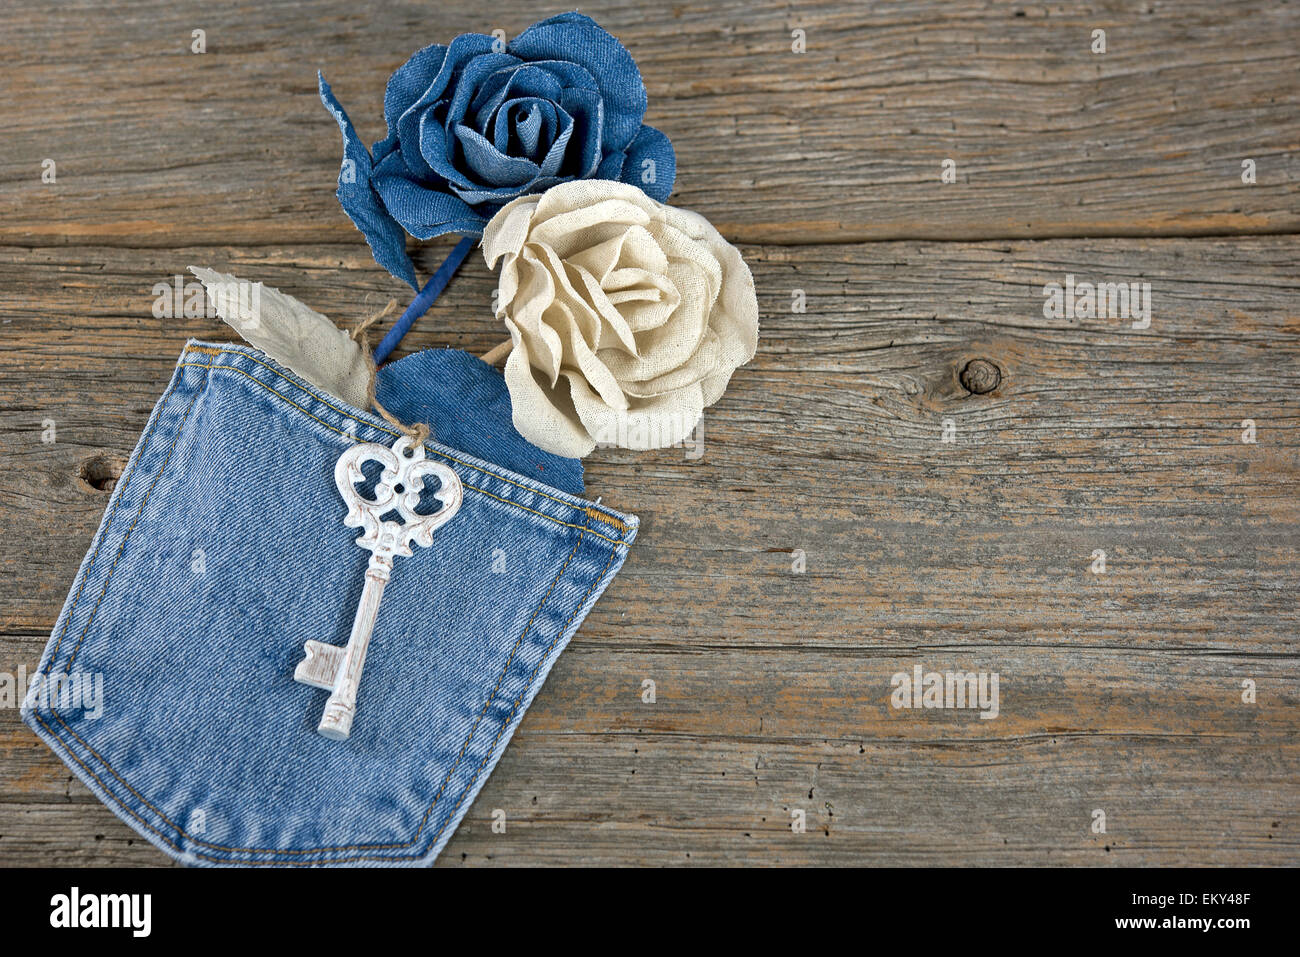 Denim roses in blue jean pocket with antique key on rustic wood. Stock Photo